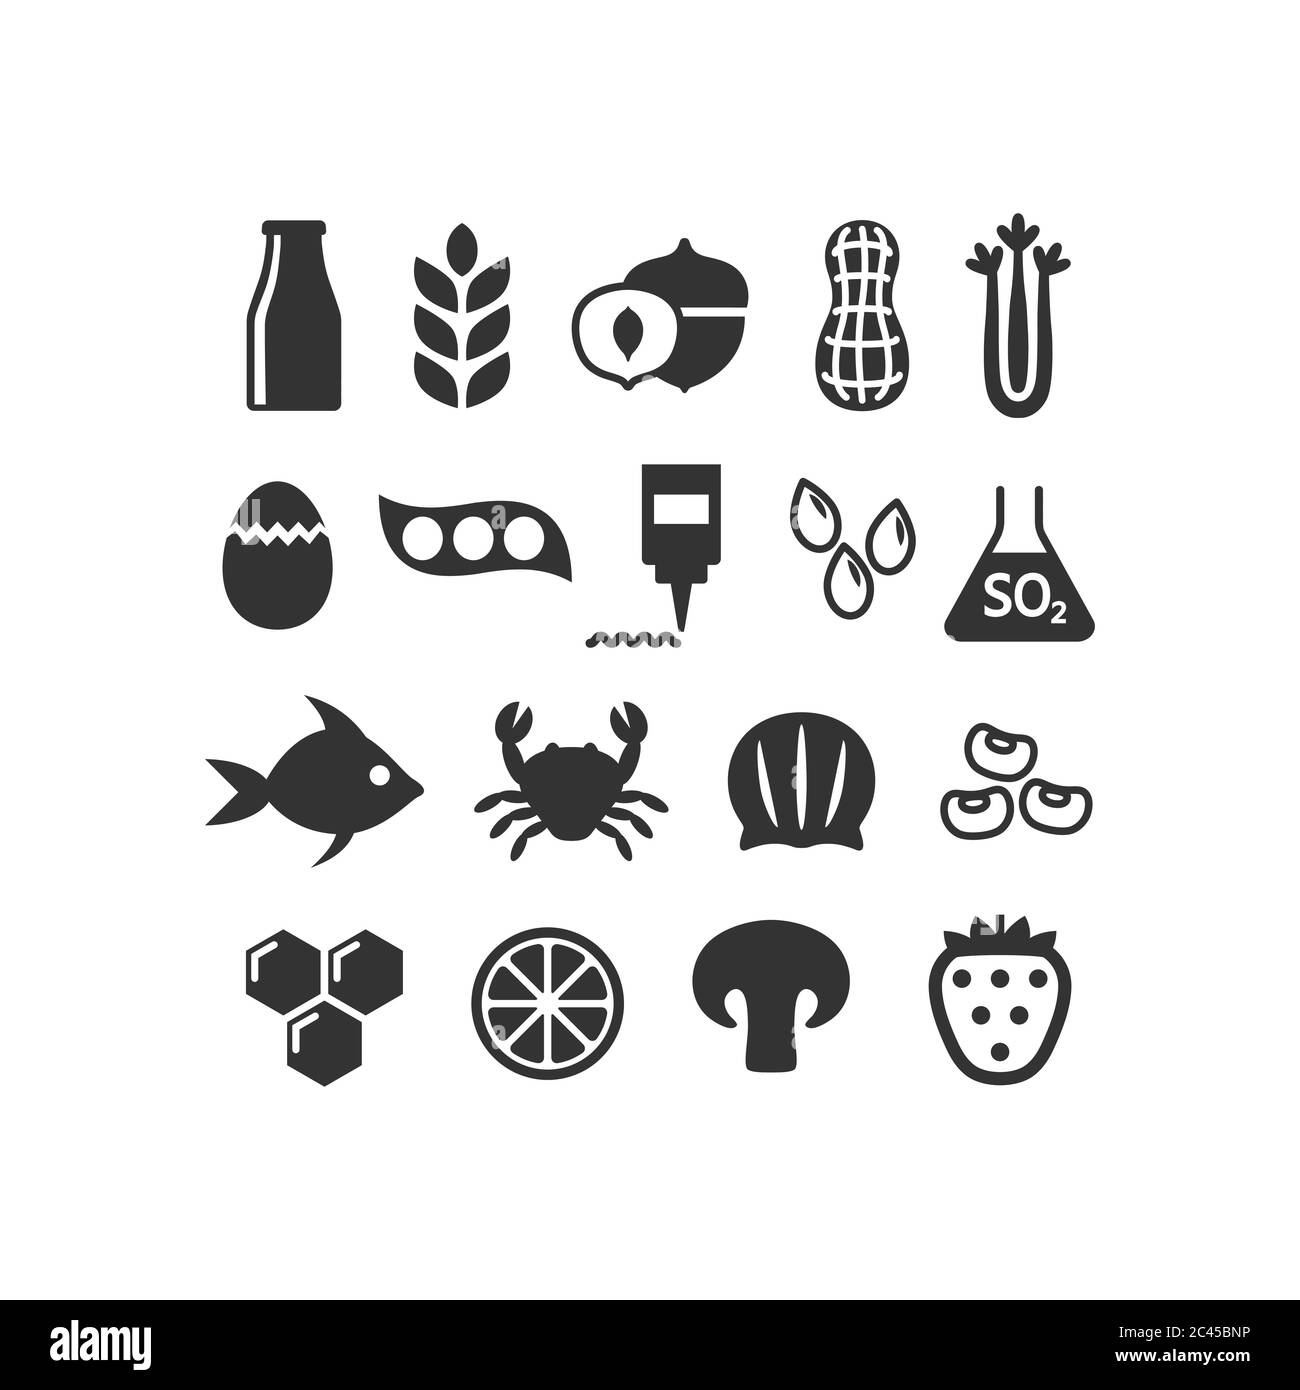 Black isolated food allergens icon set. Food allergy symbols vector silhouette set. Stock Vector